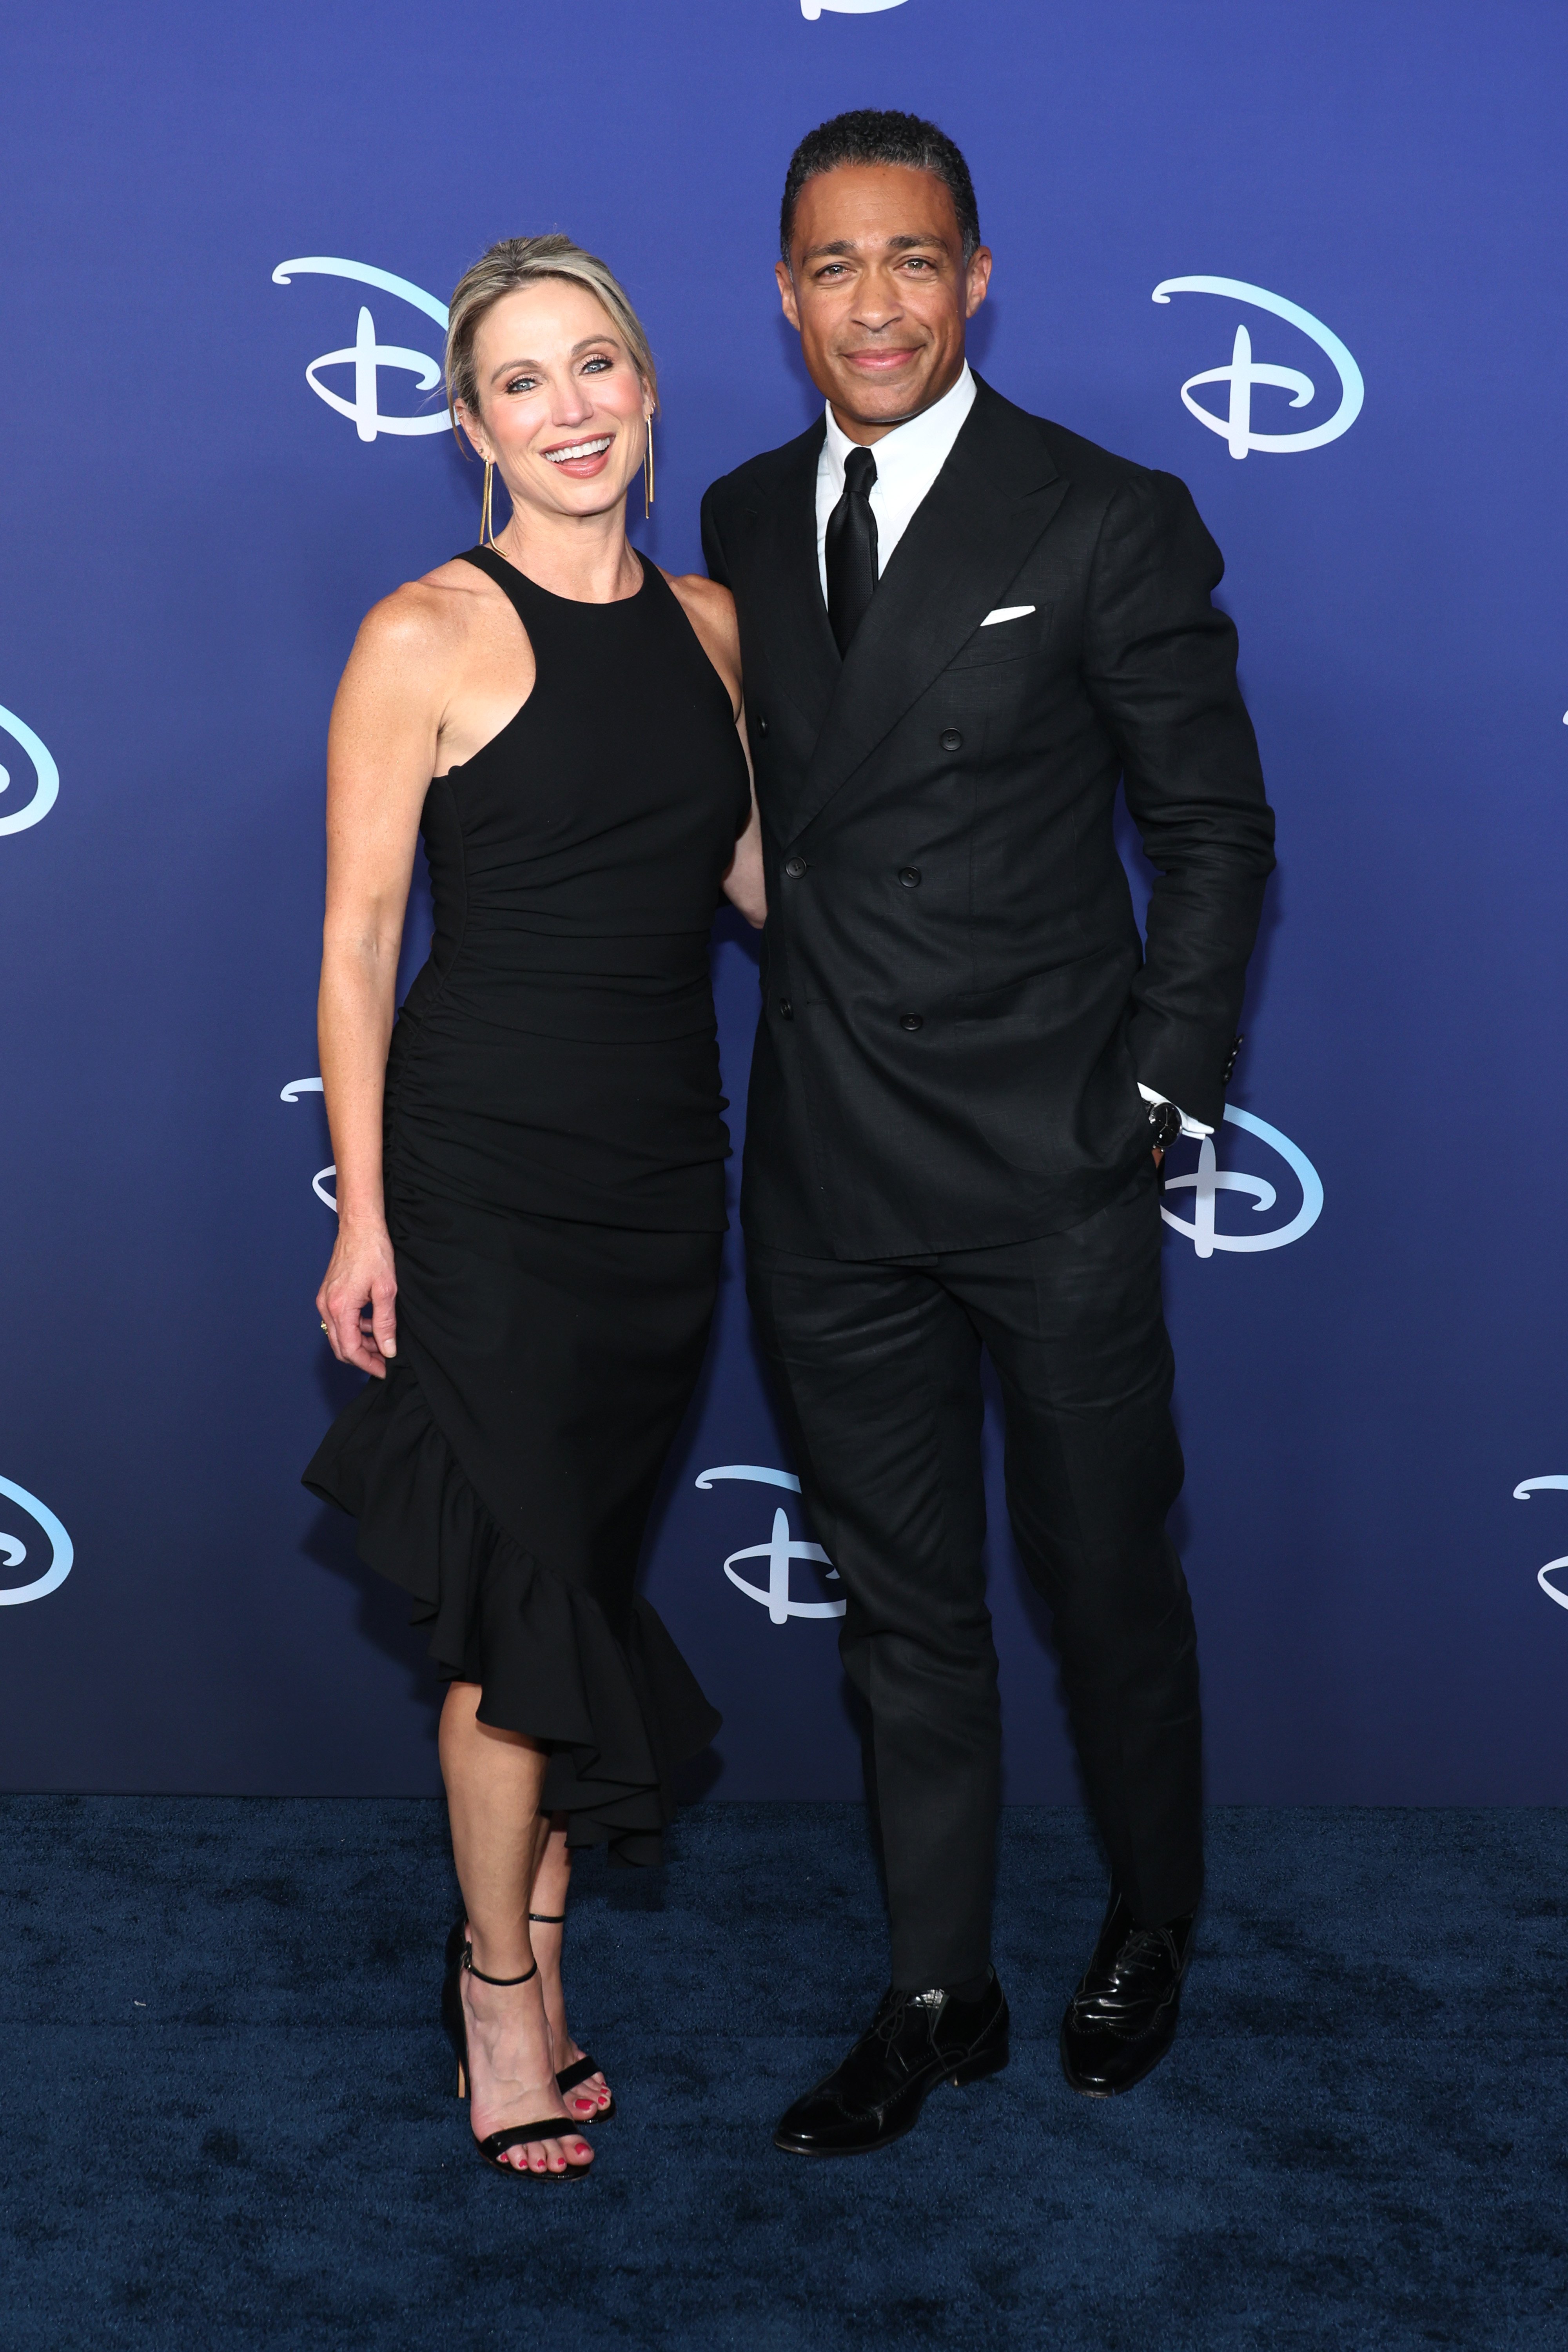 Amy Robach and TJ Holmes attend the 2022 ABC Disney Upfront at Basketball City - Pier 36 - South Street in New York City on May 17, 2022. | Source: Getty Images